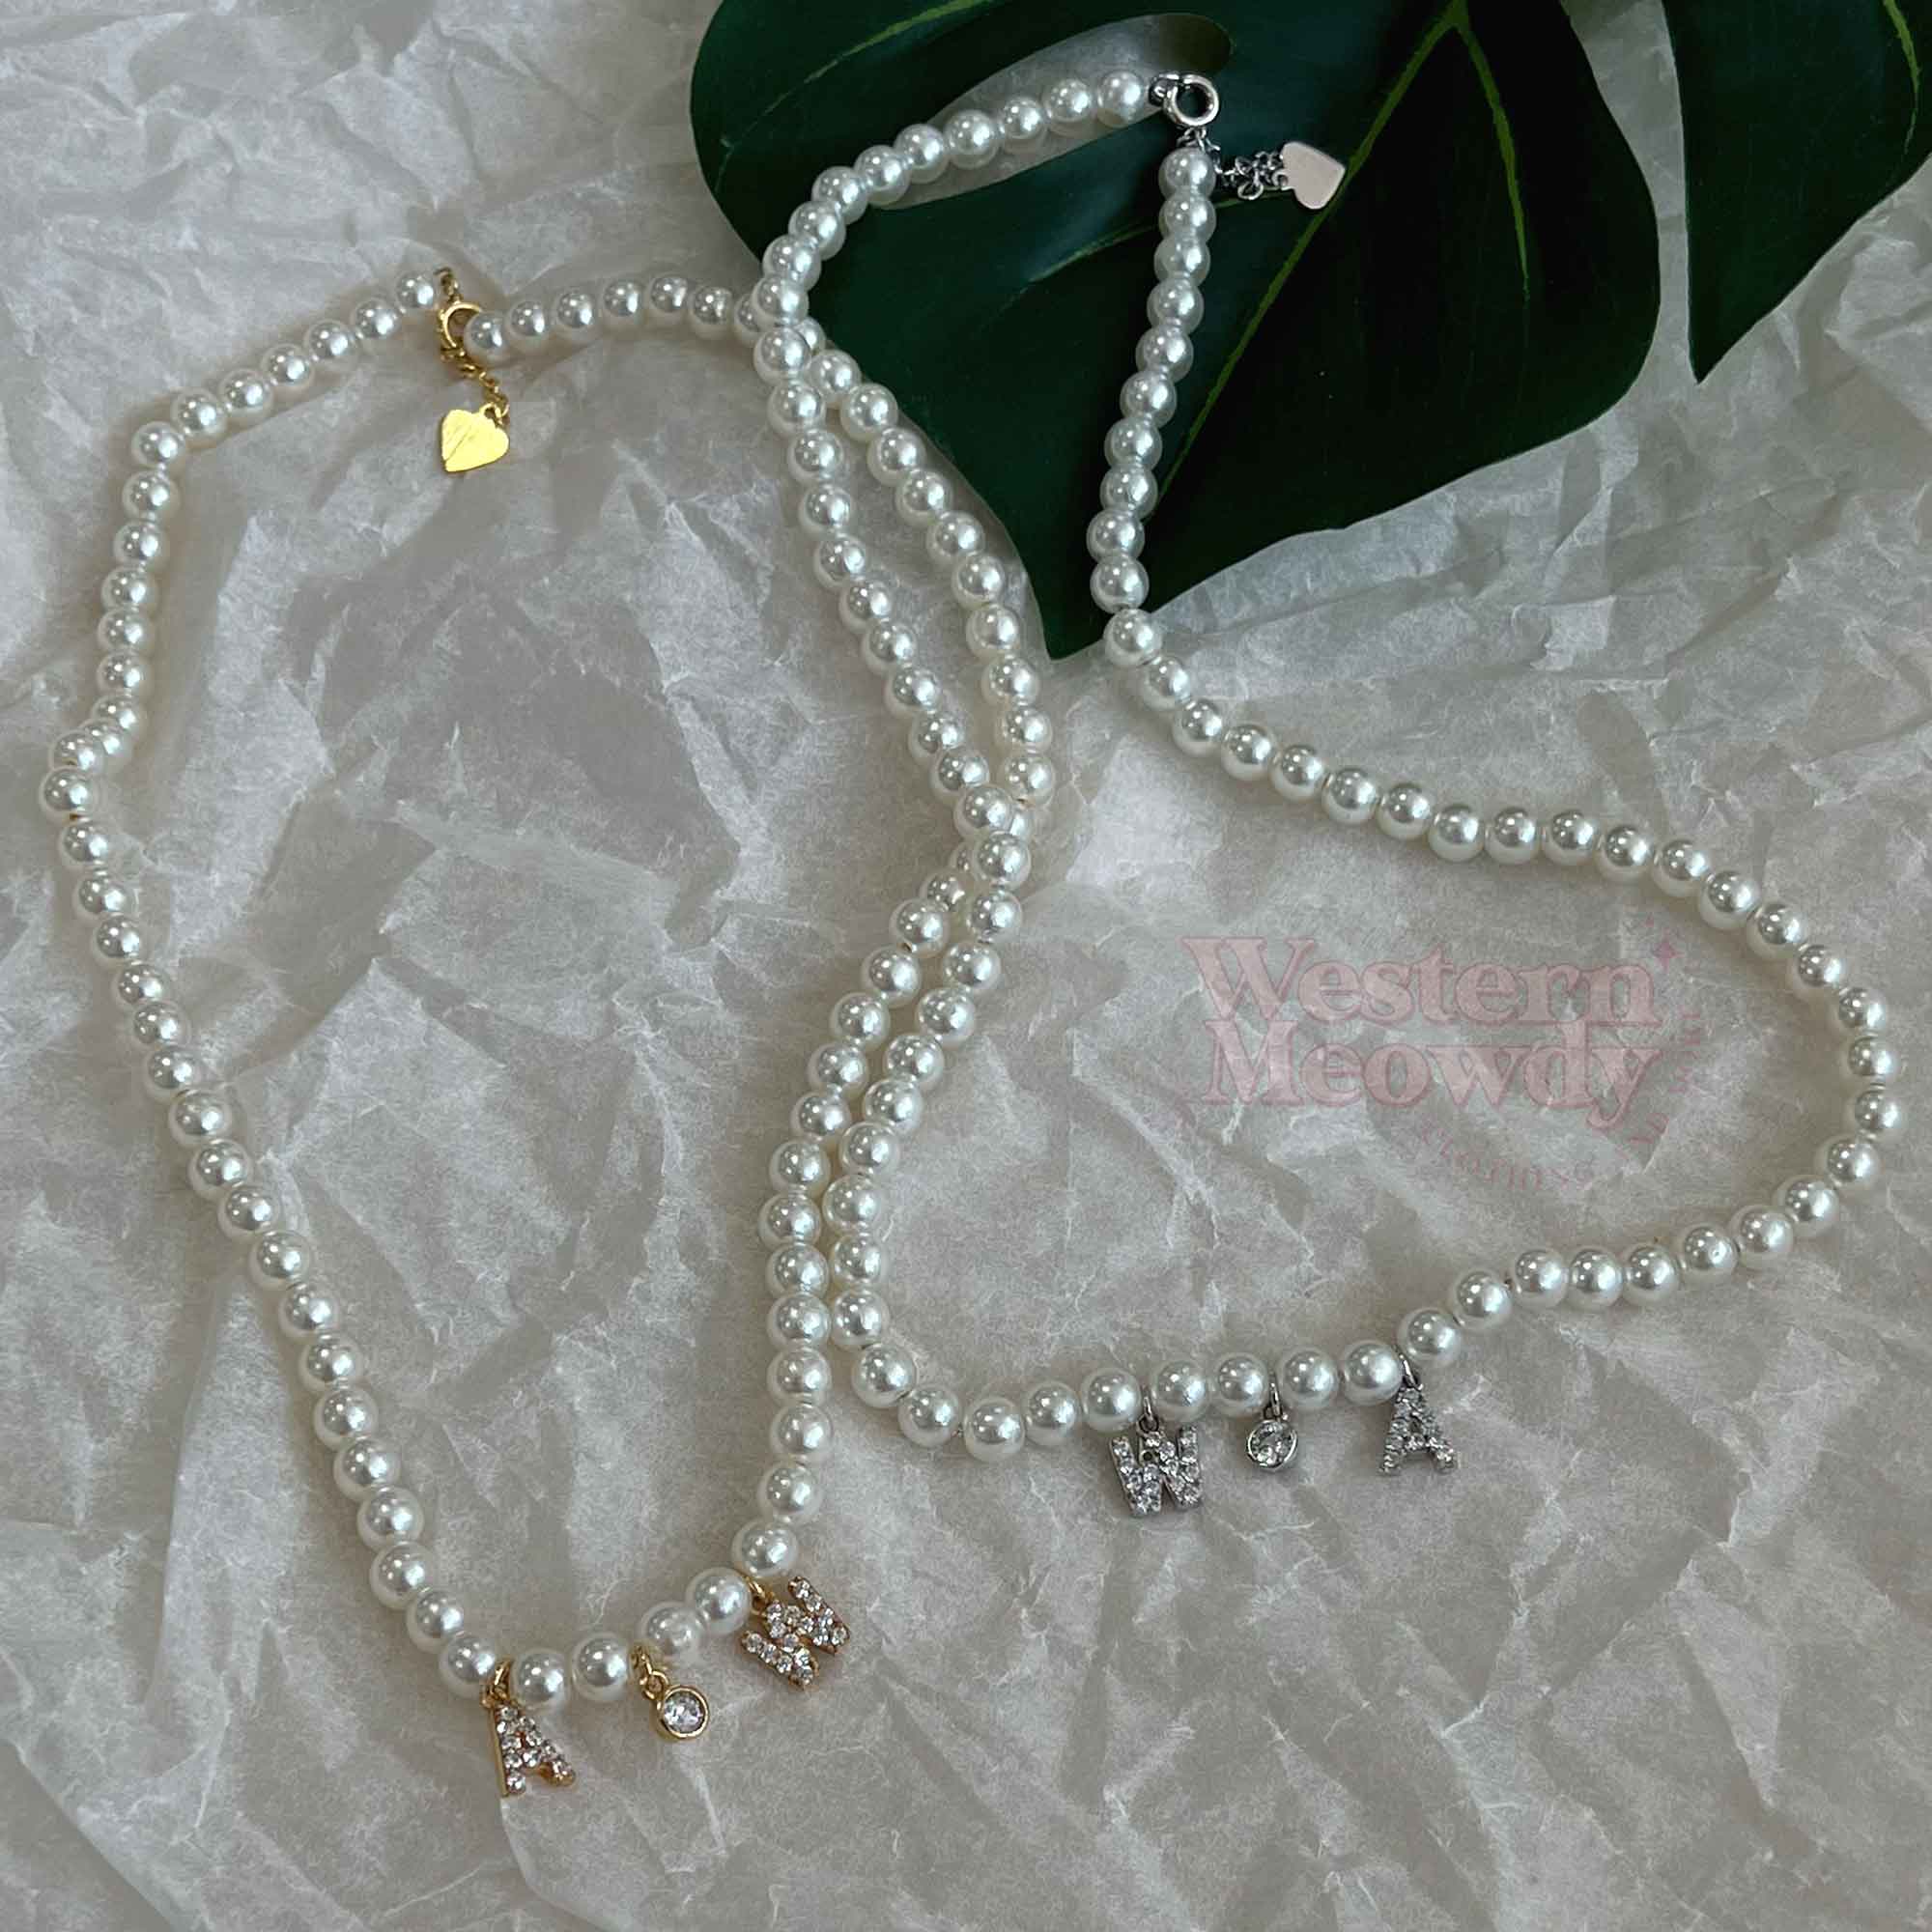 Lana Del Rey Style Stash Necklace Heart Rosary With Stainless Steel  Construction | eBay